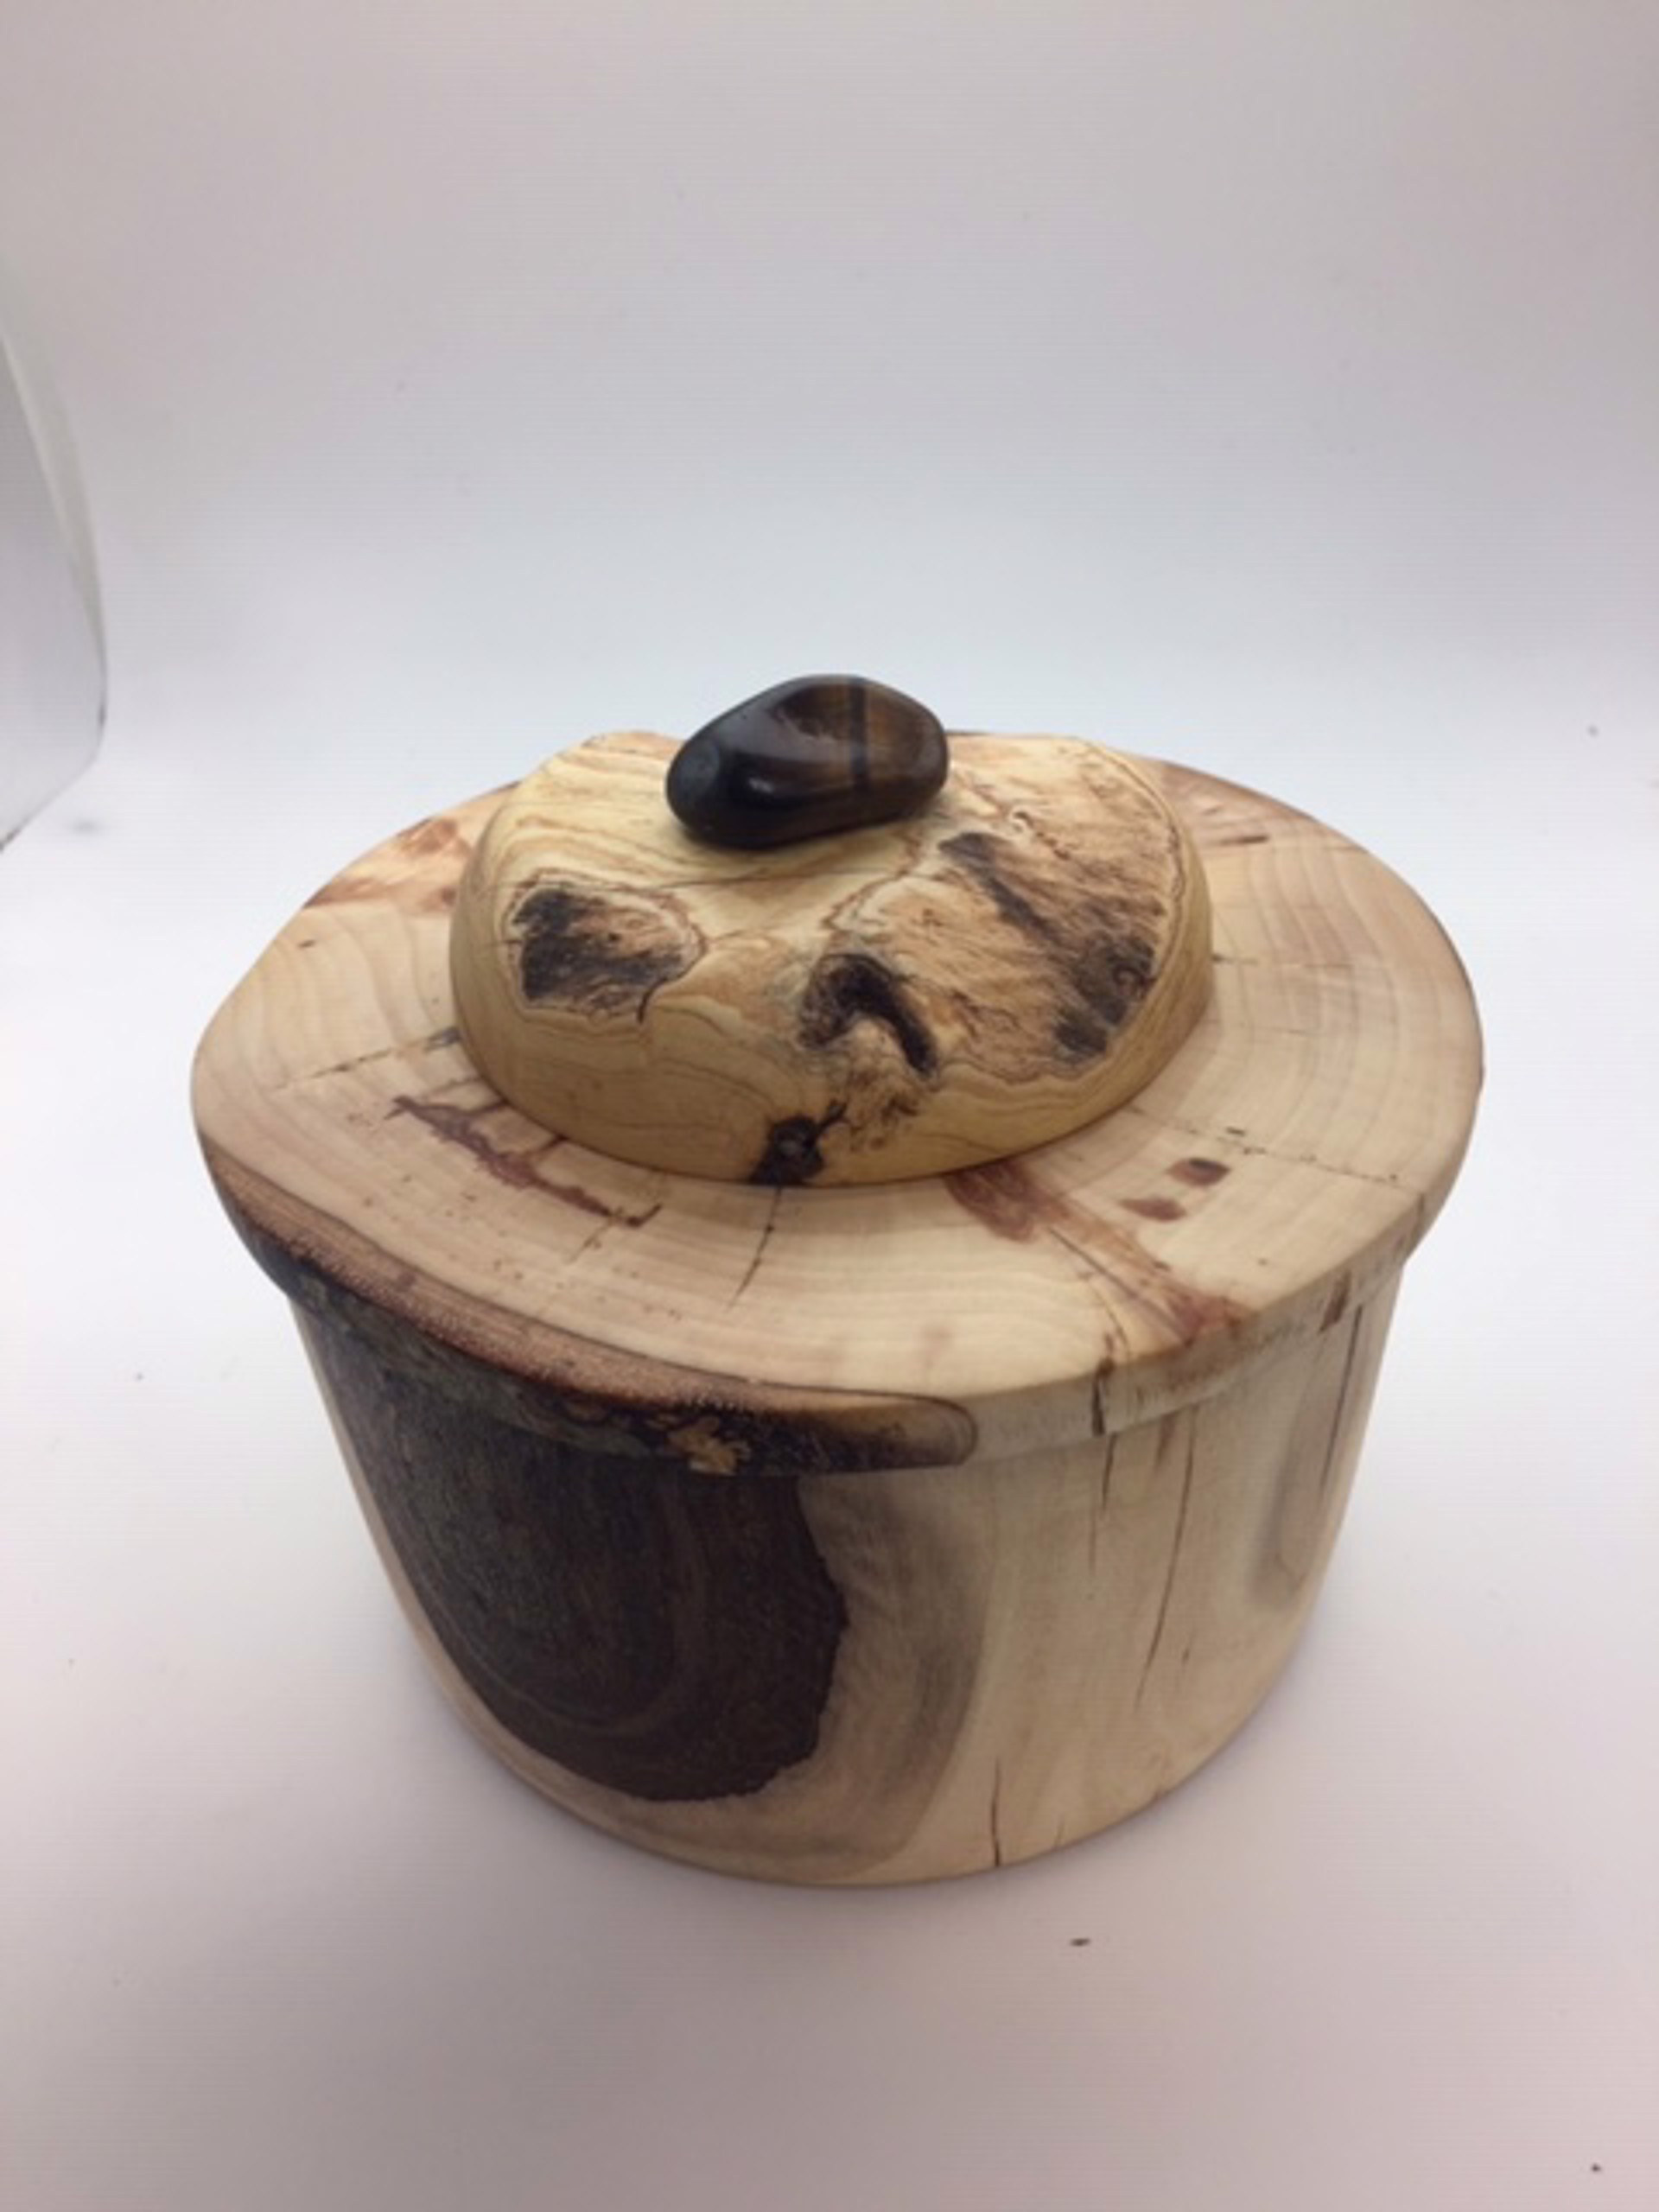 Turned Wood Jar W/Lid #22-90 by Rick Squires